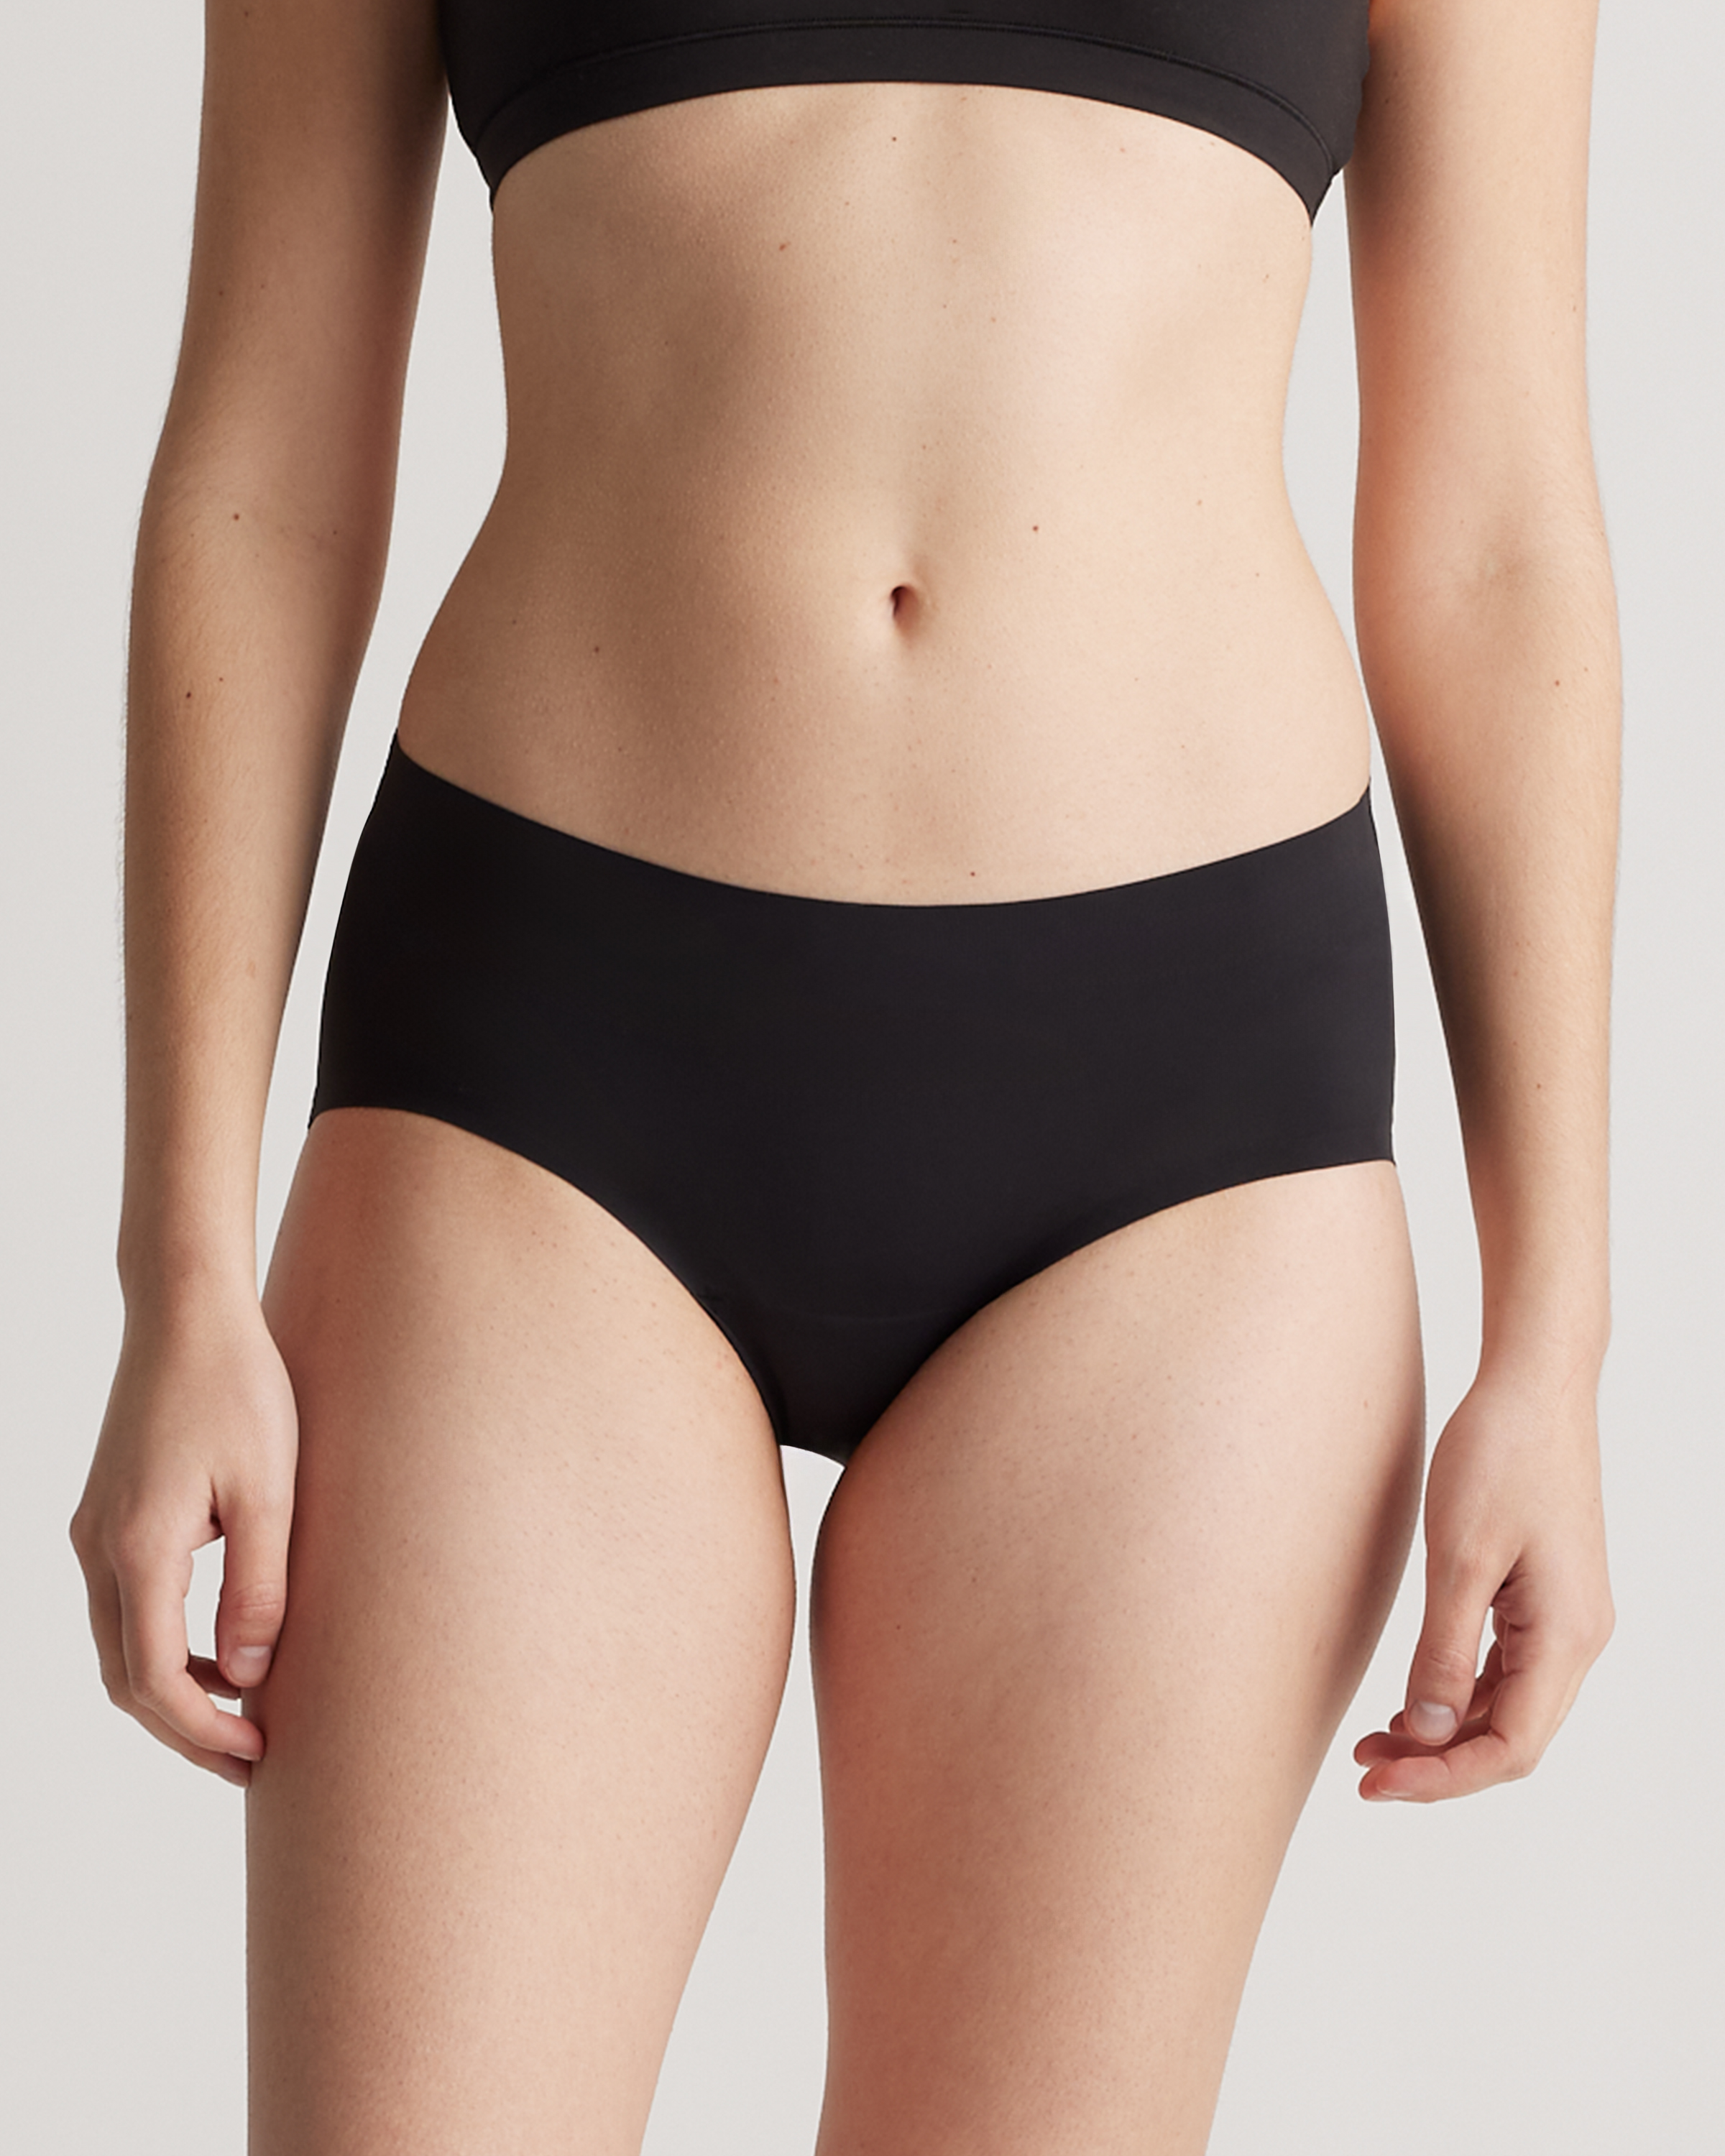 Seamless Underwear vs Bonded Underwear: What's the Difference